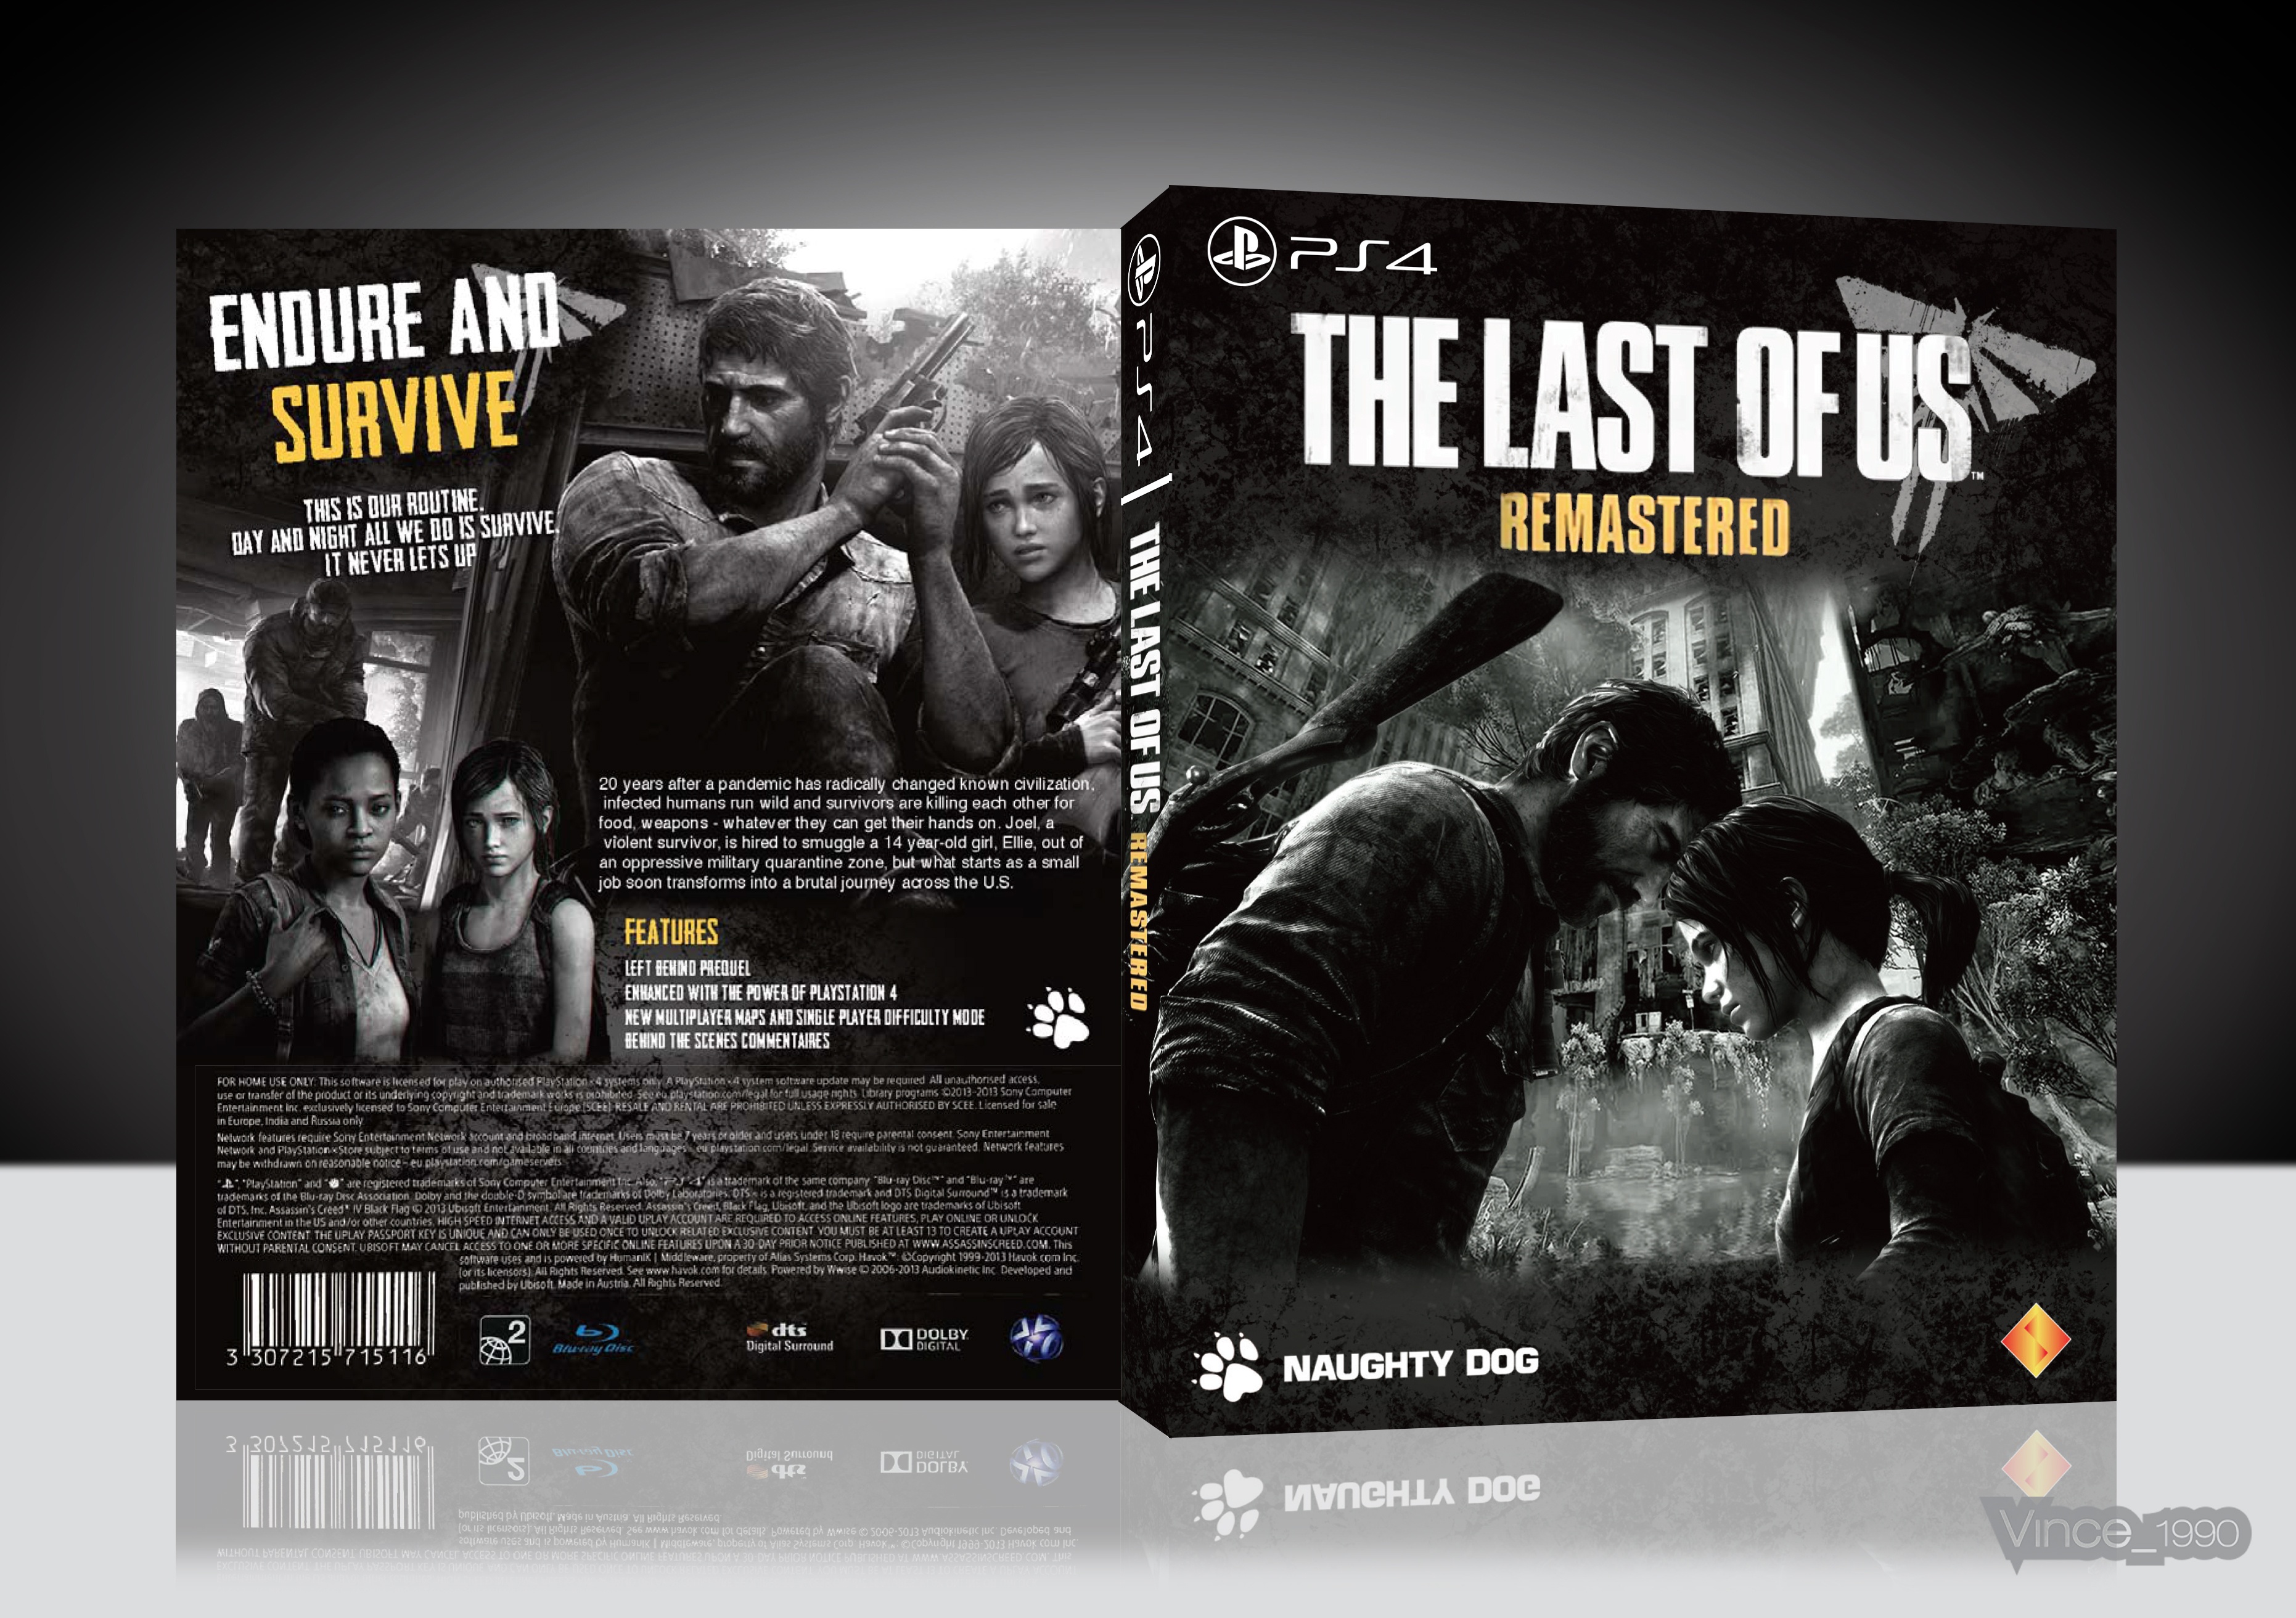 The Last Of Us Remastered Playstation 4 Box Art Cover By Vince1990